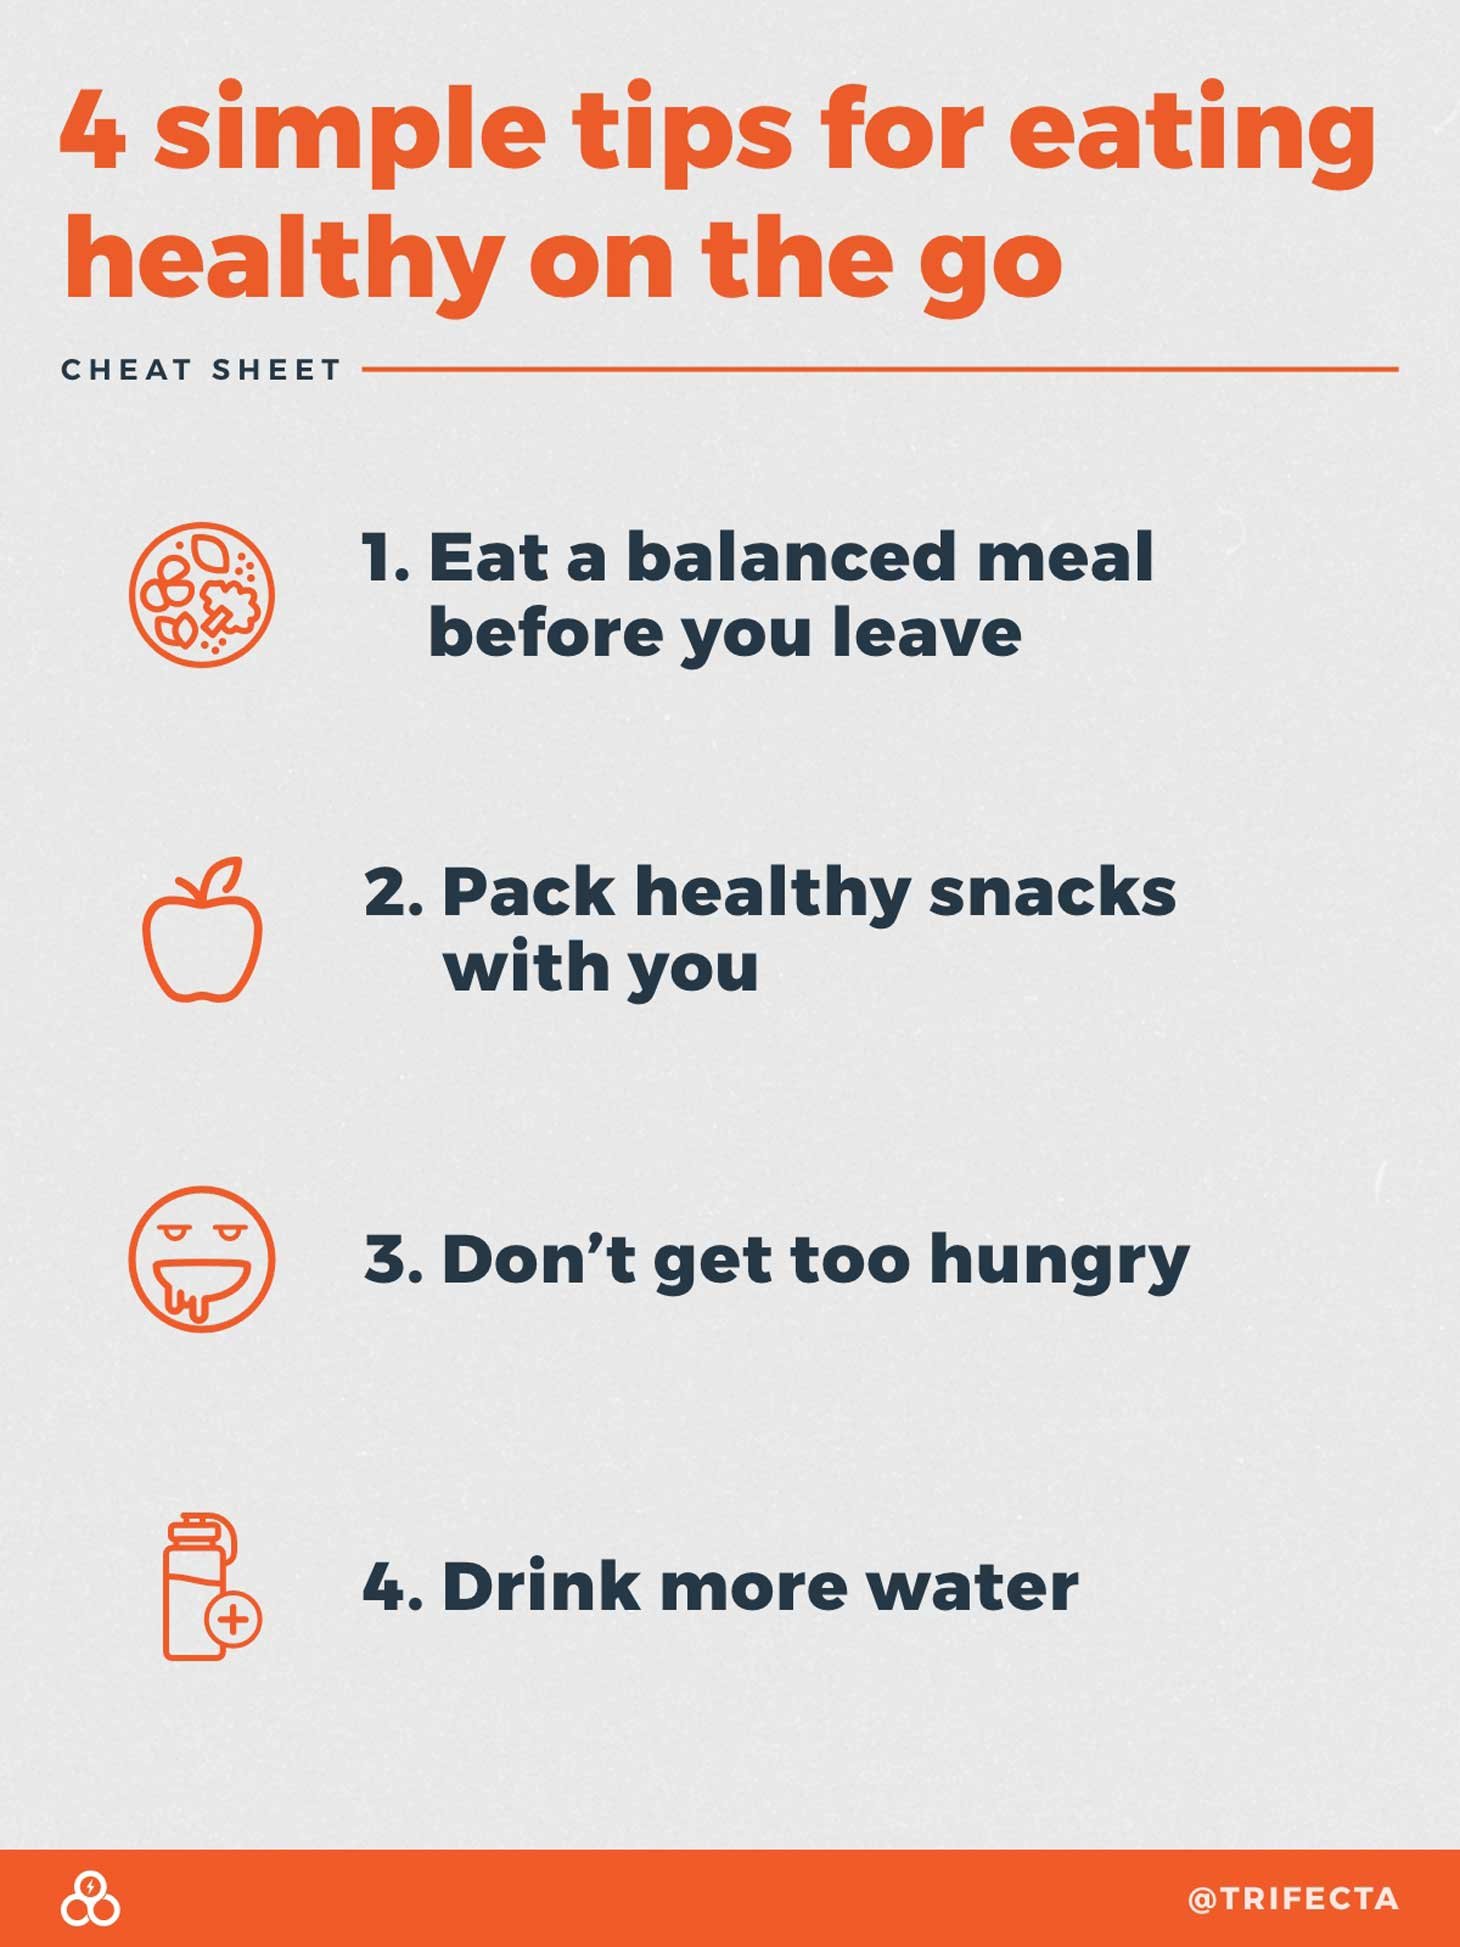 4 healthy eating tips for on the go